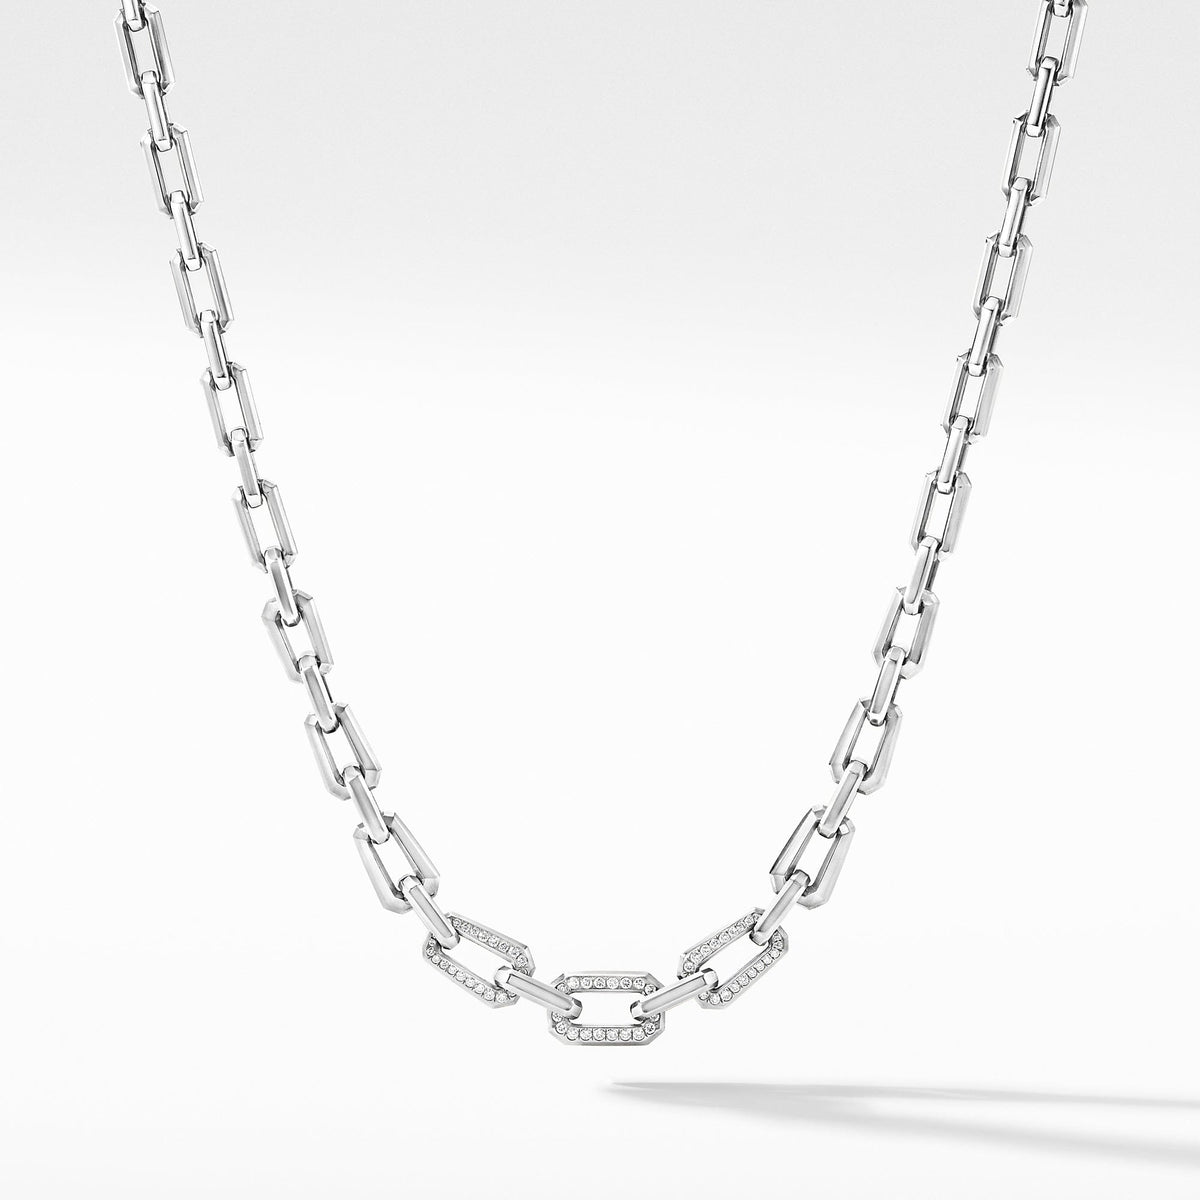 Novella Chain Necklace with Pavé Diamonds, Long's Jewelers